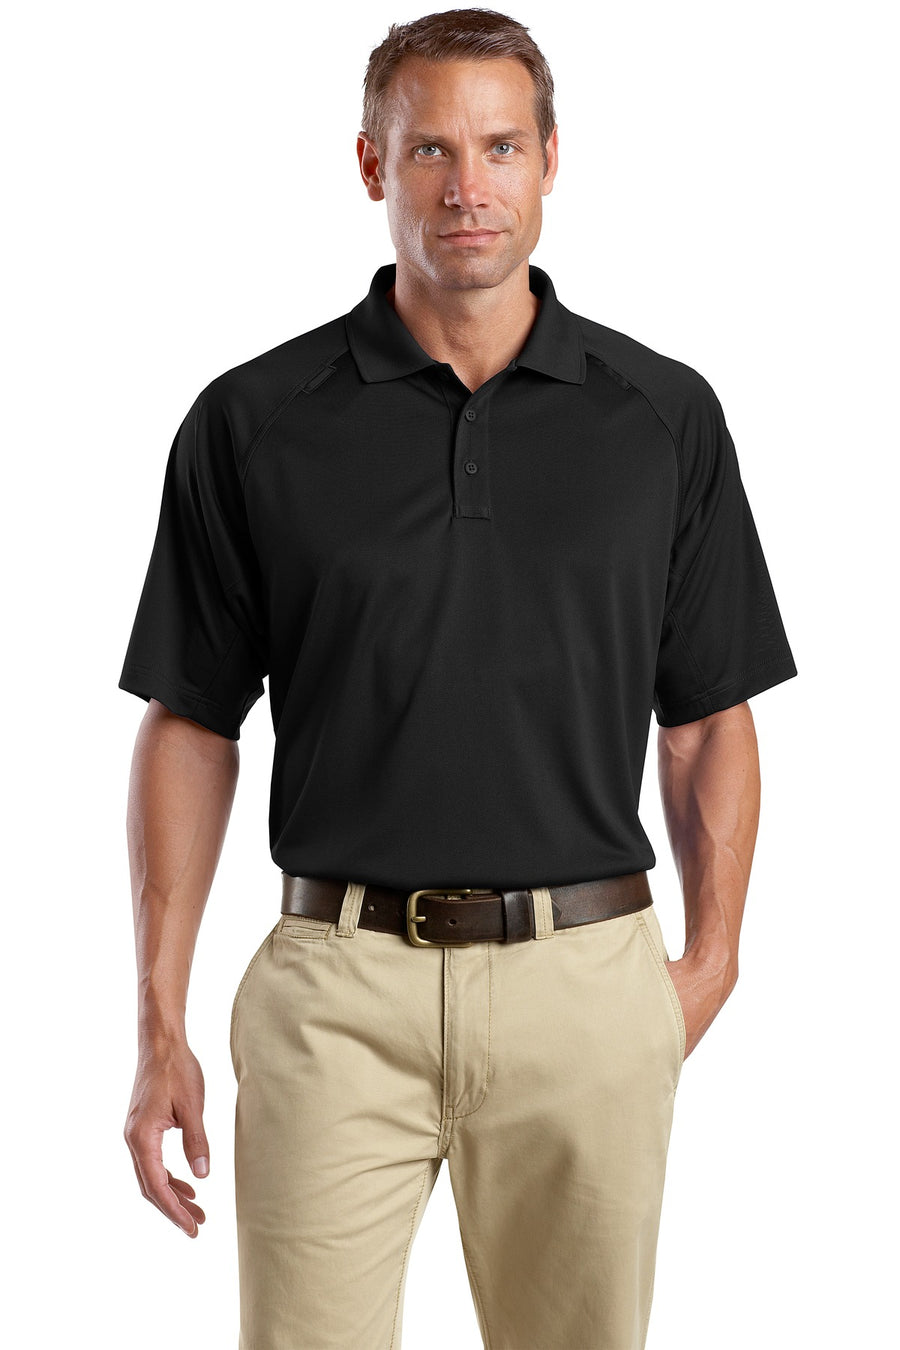 CornerStone Tall Select Snag-Proof Tactical Polo.